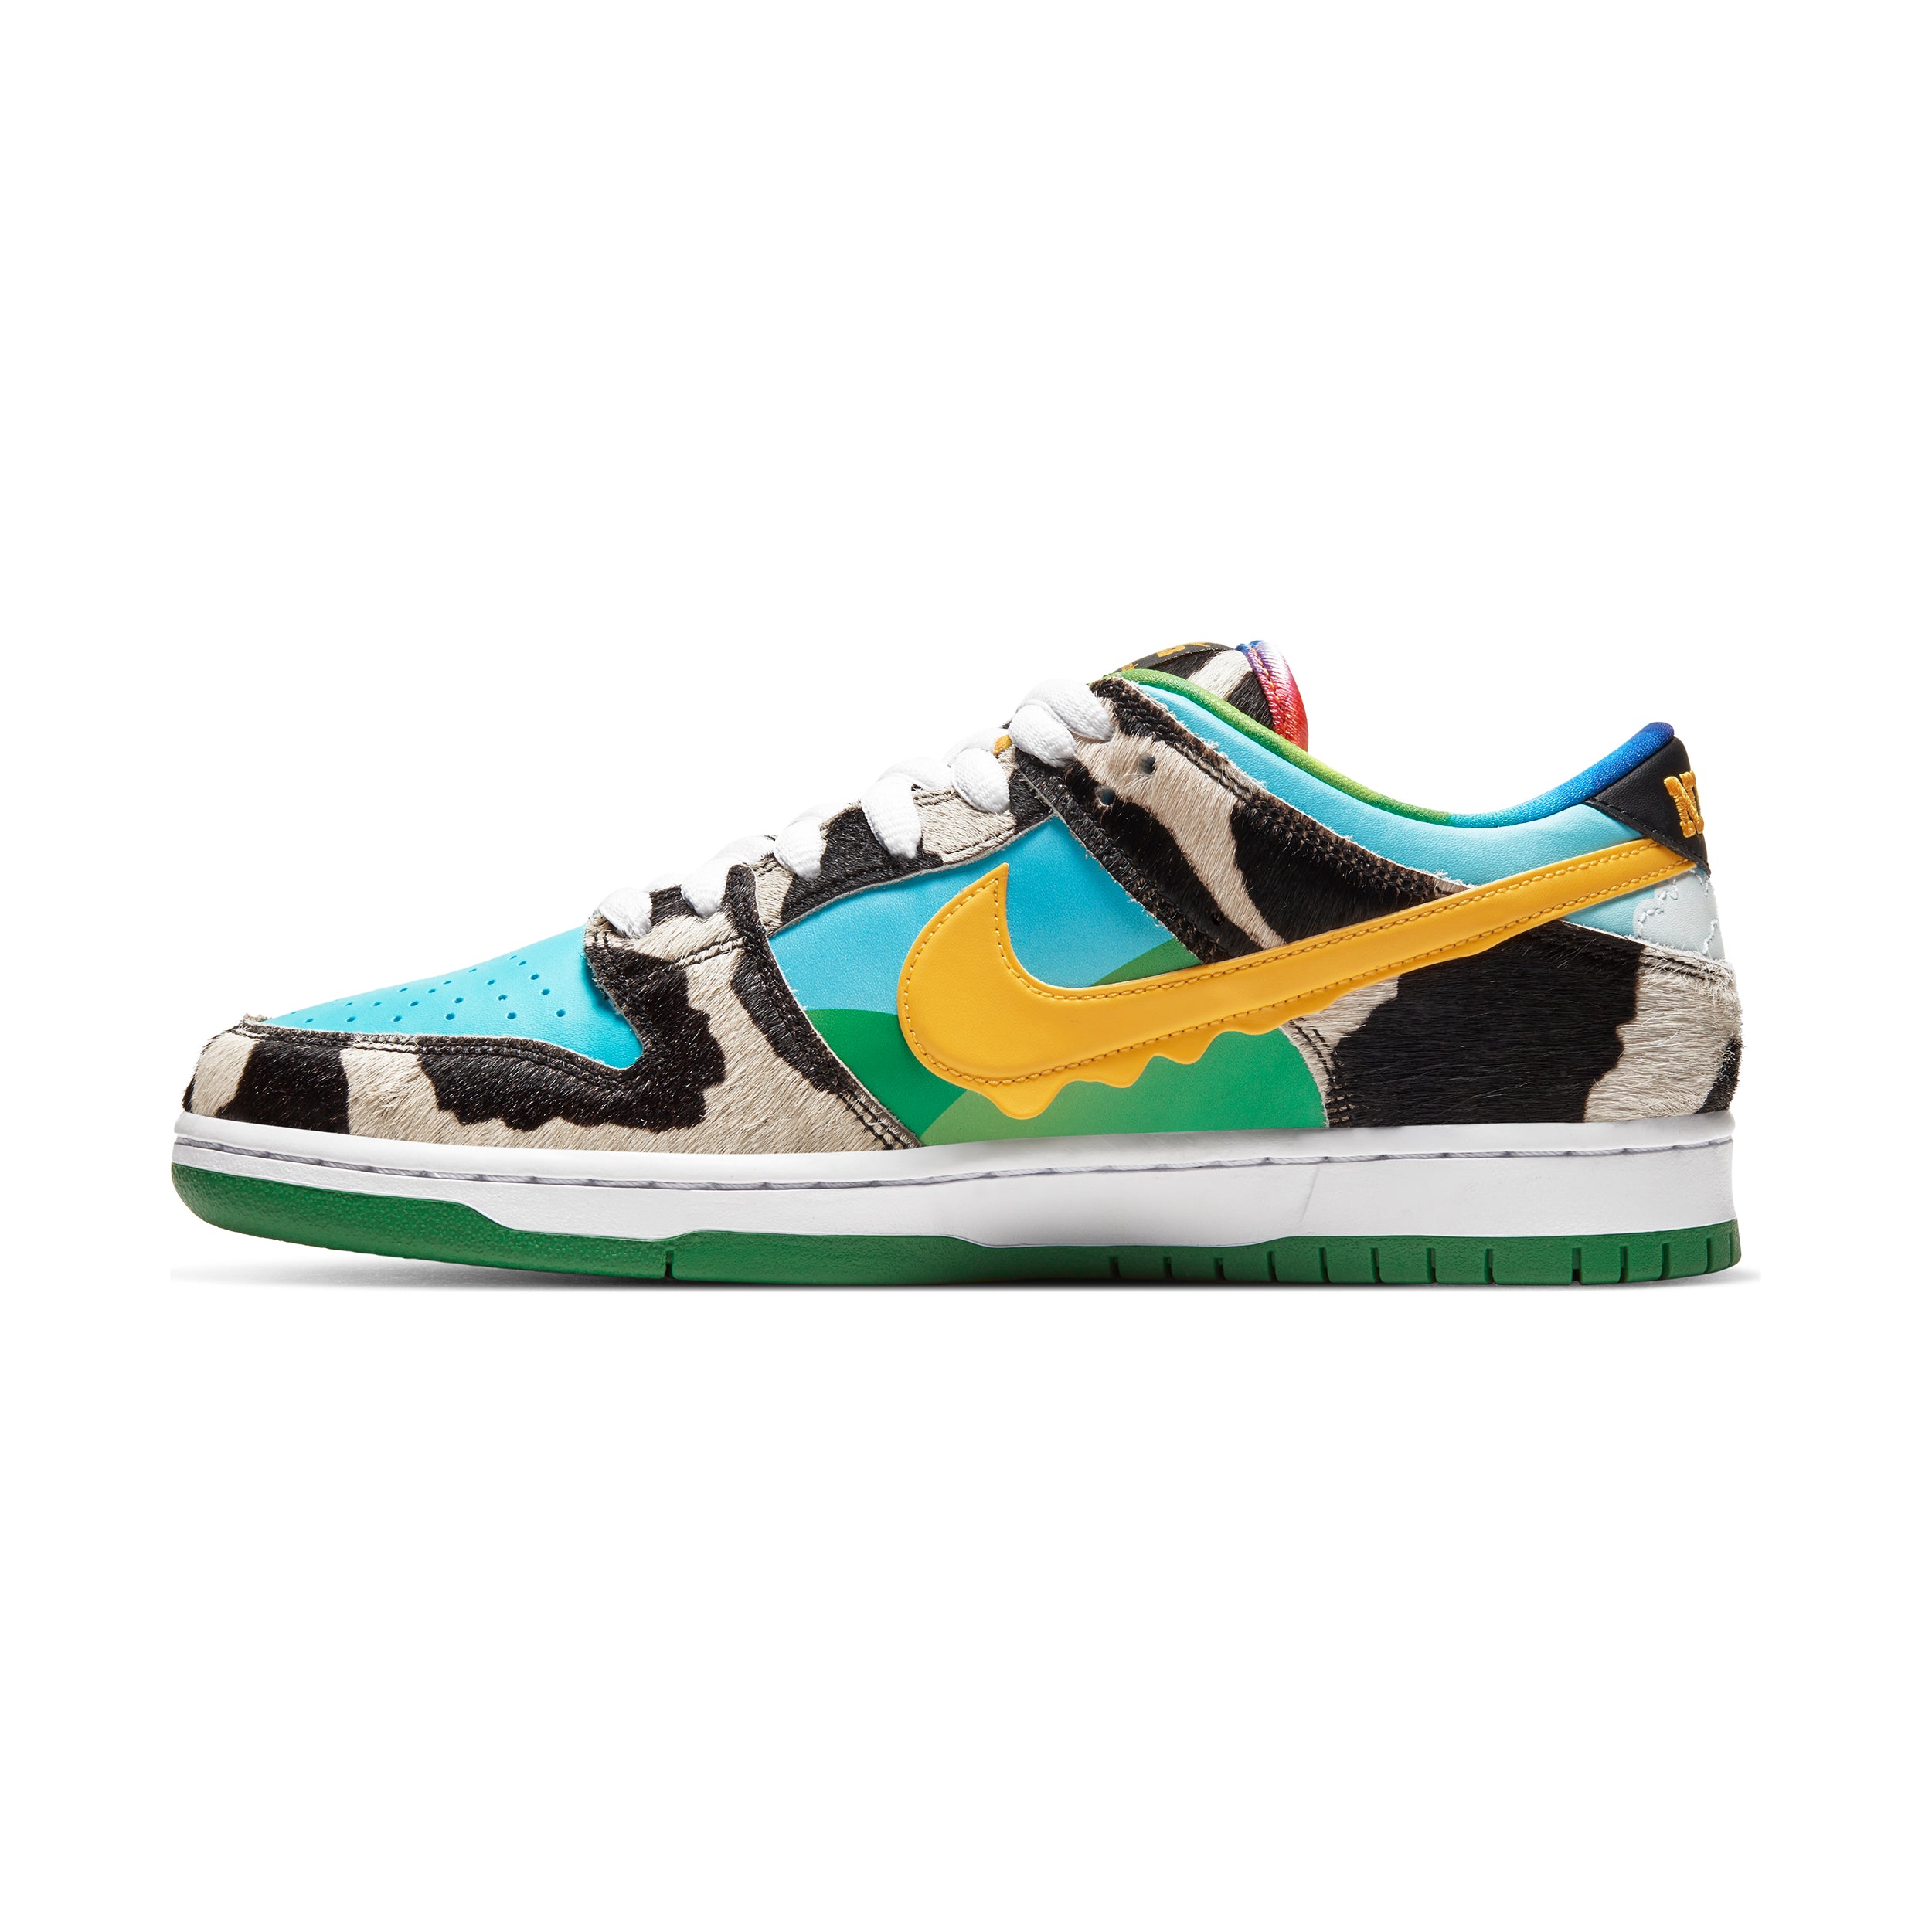 Concepts Nike SB Dunk Low 'Chunky Dunky'